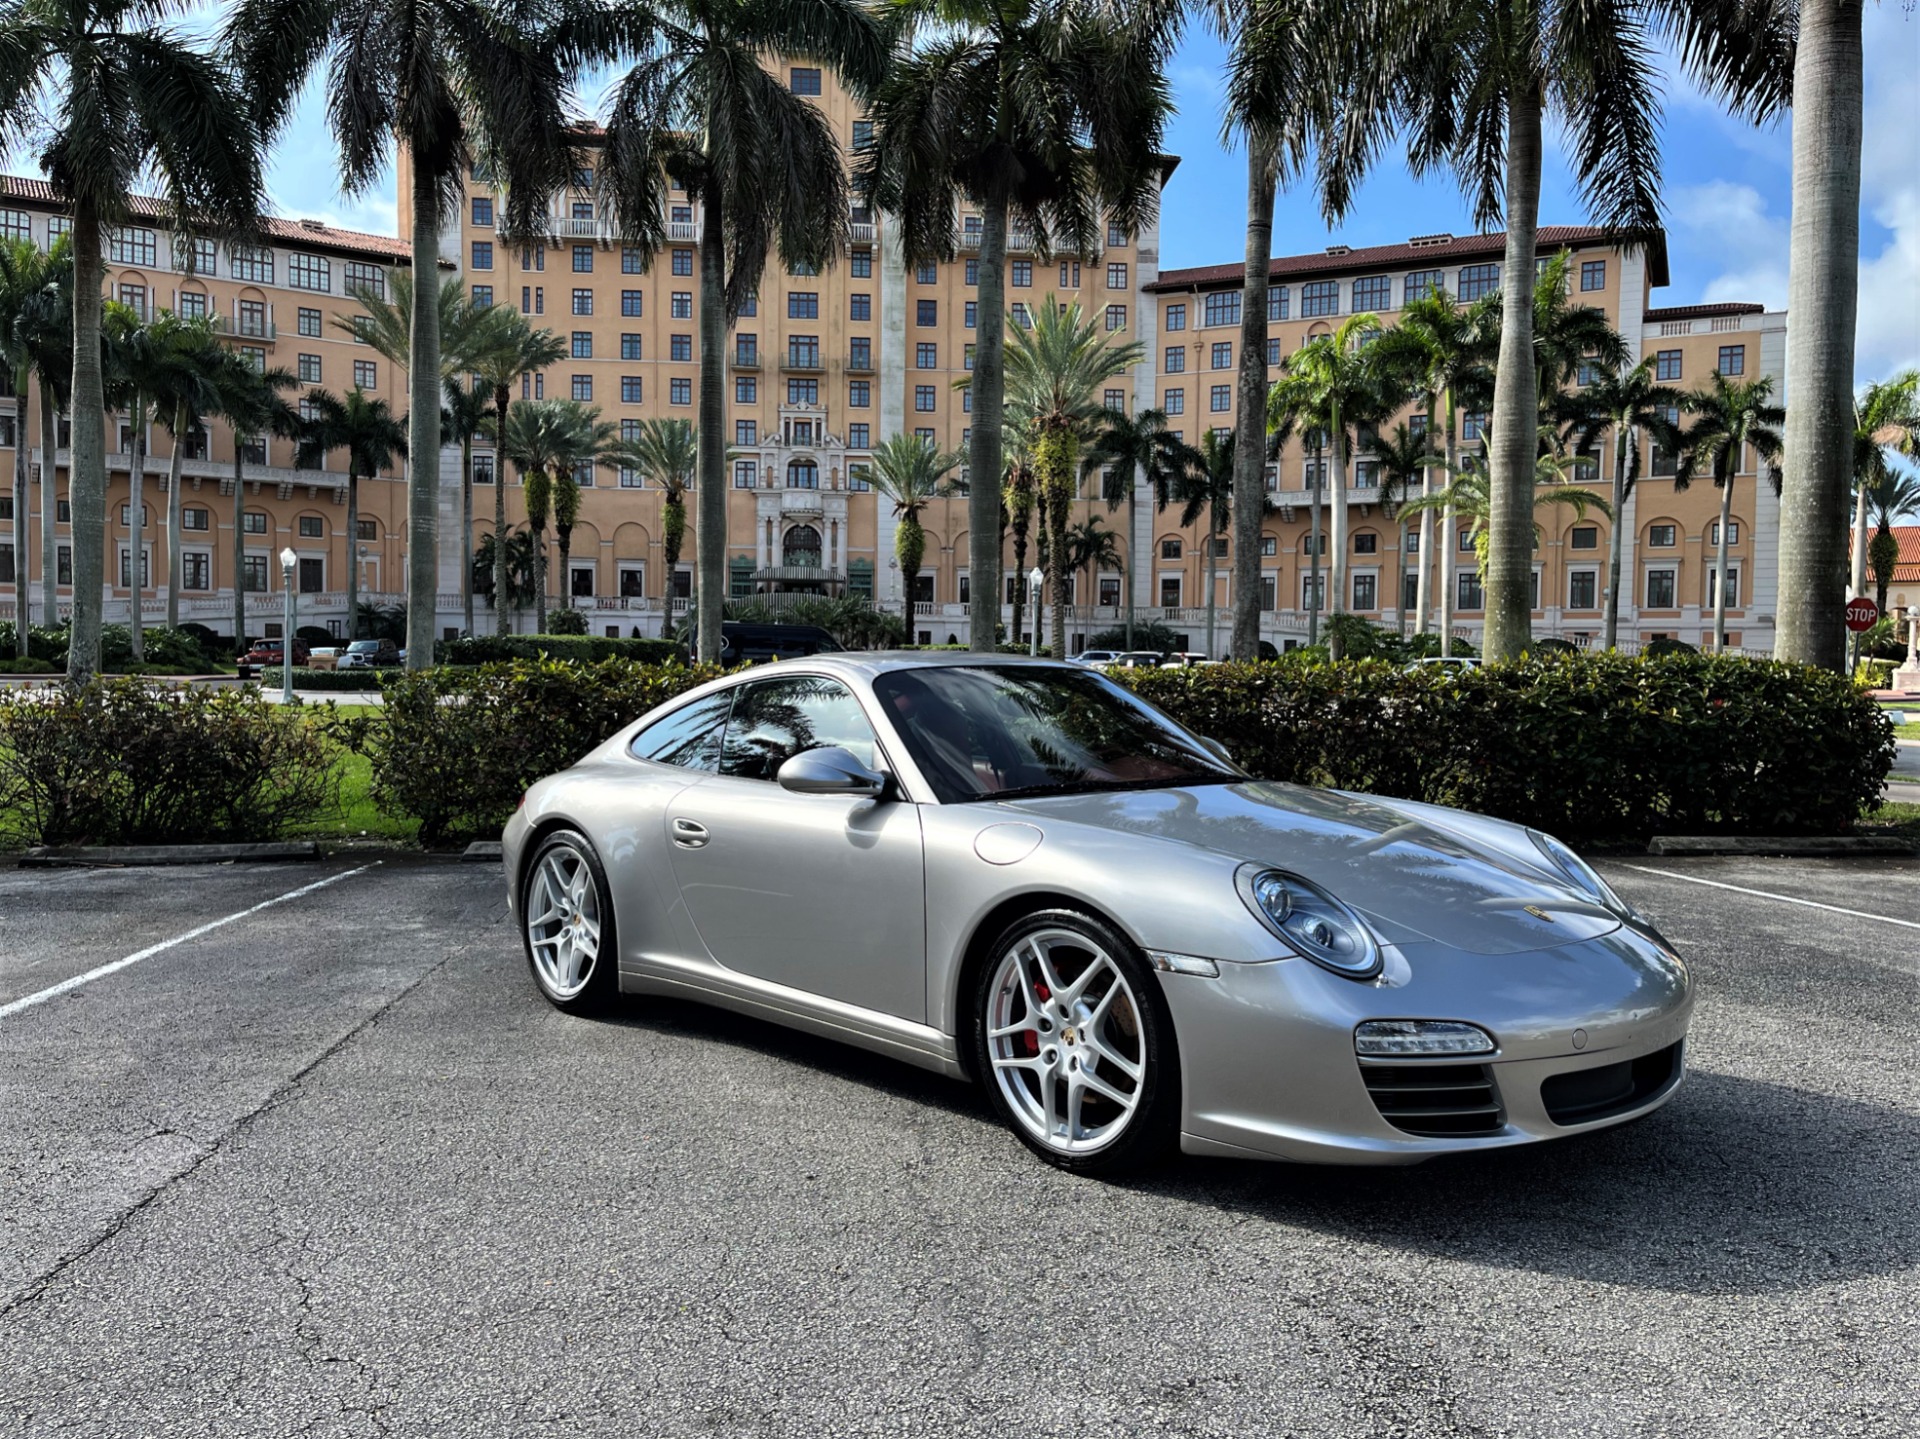 Used 2011 Porsche 911 Carrera 4S for sale Sold at The Gables Sports Cars in Miami FL 33146 2